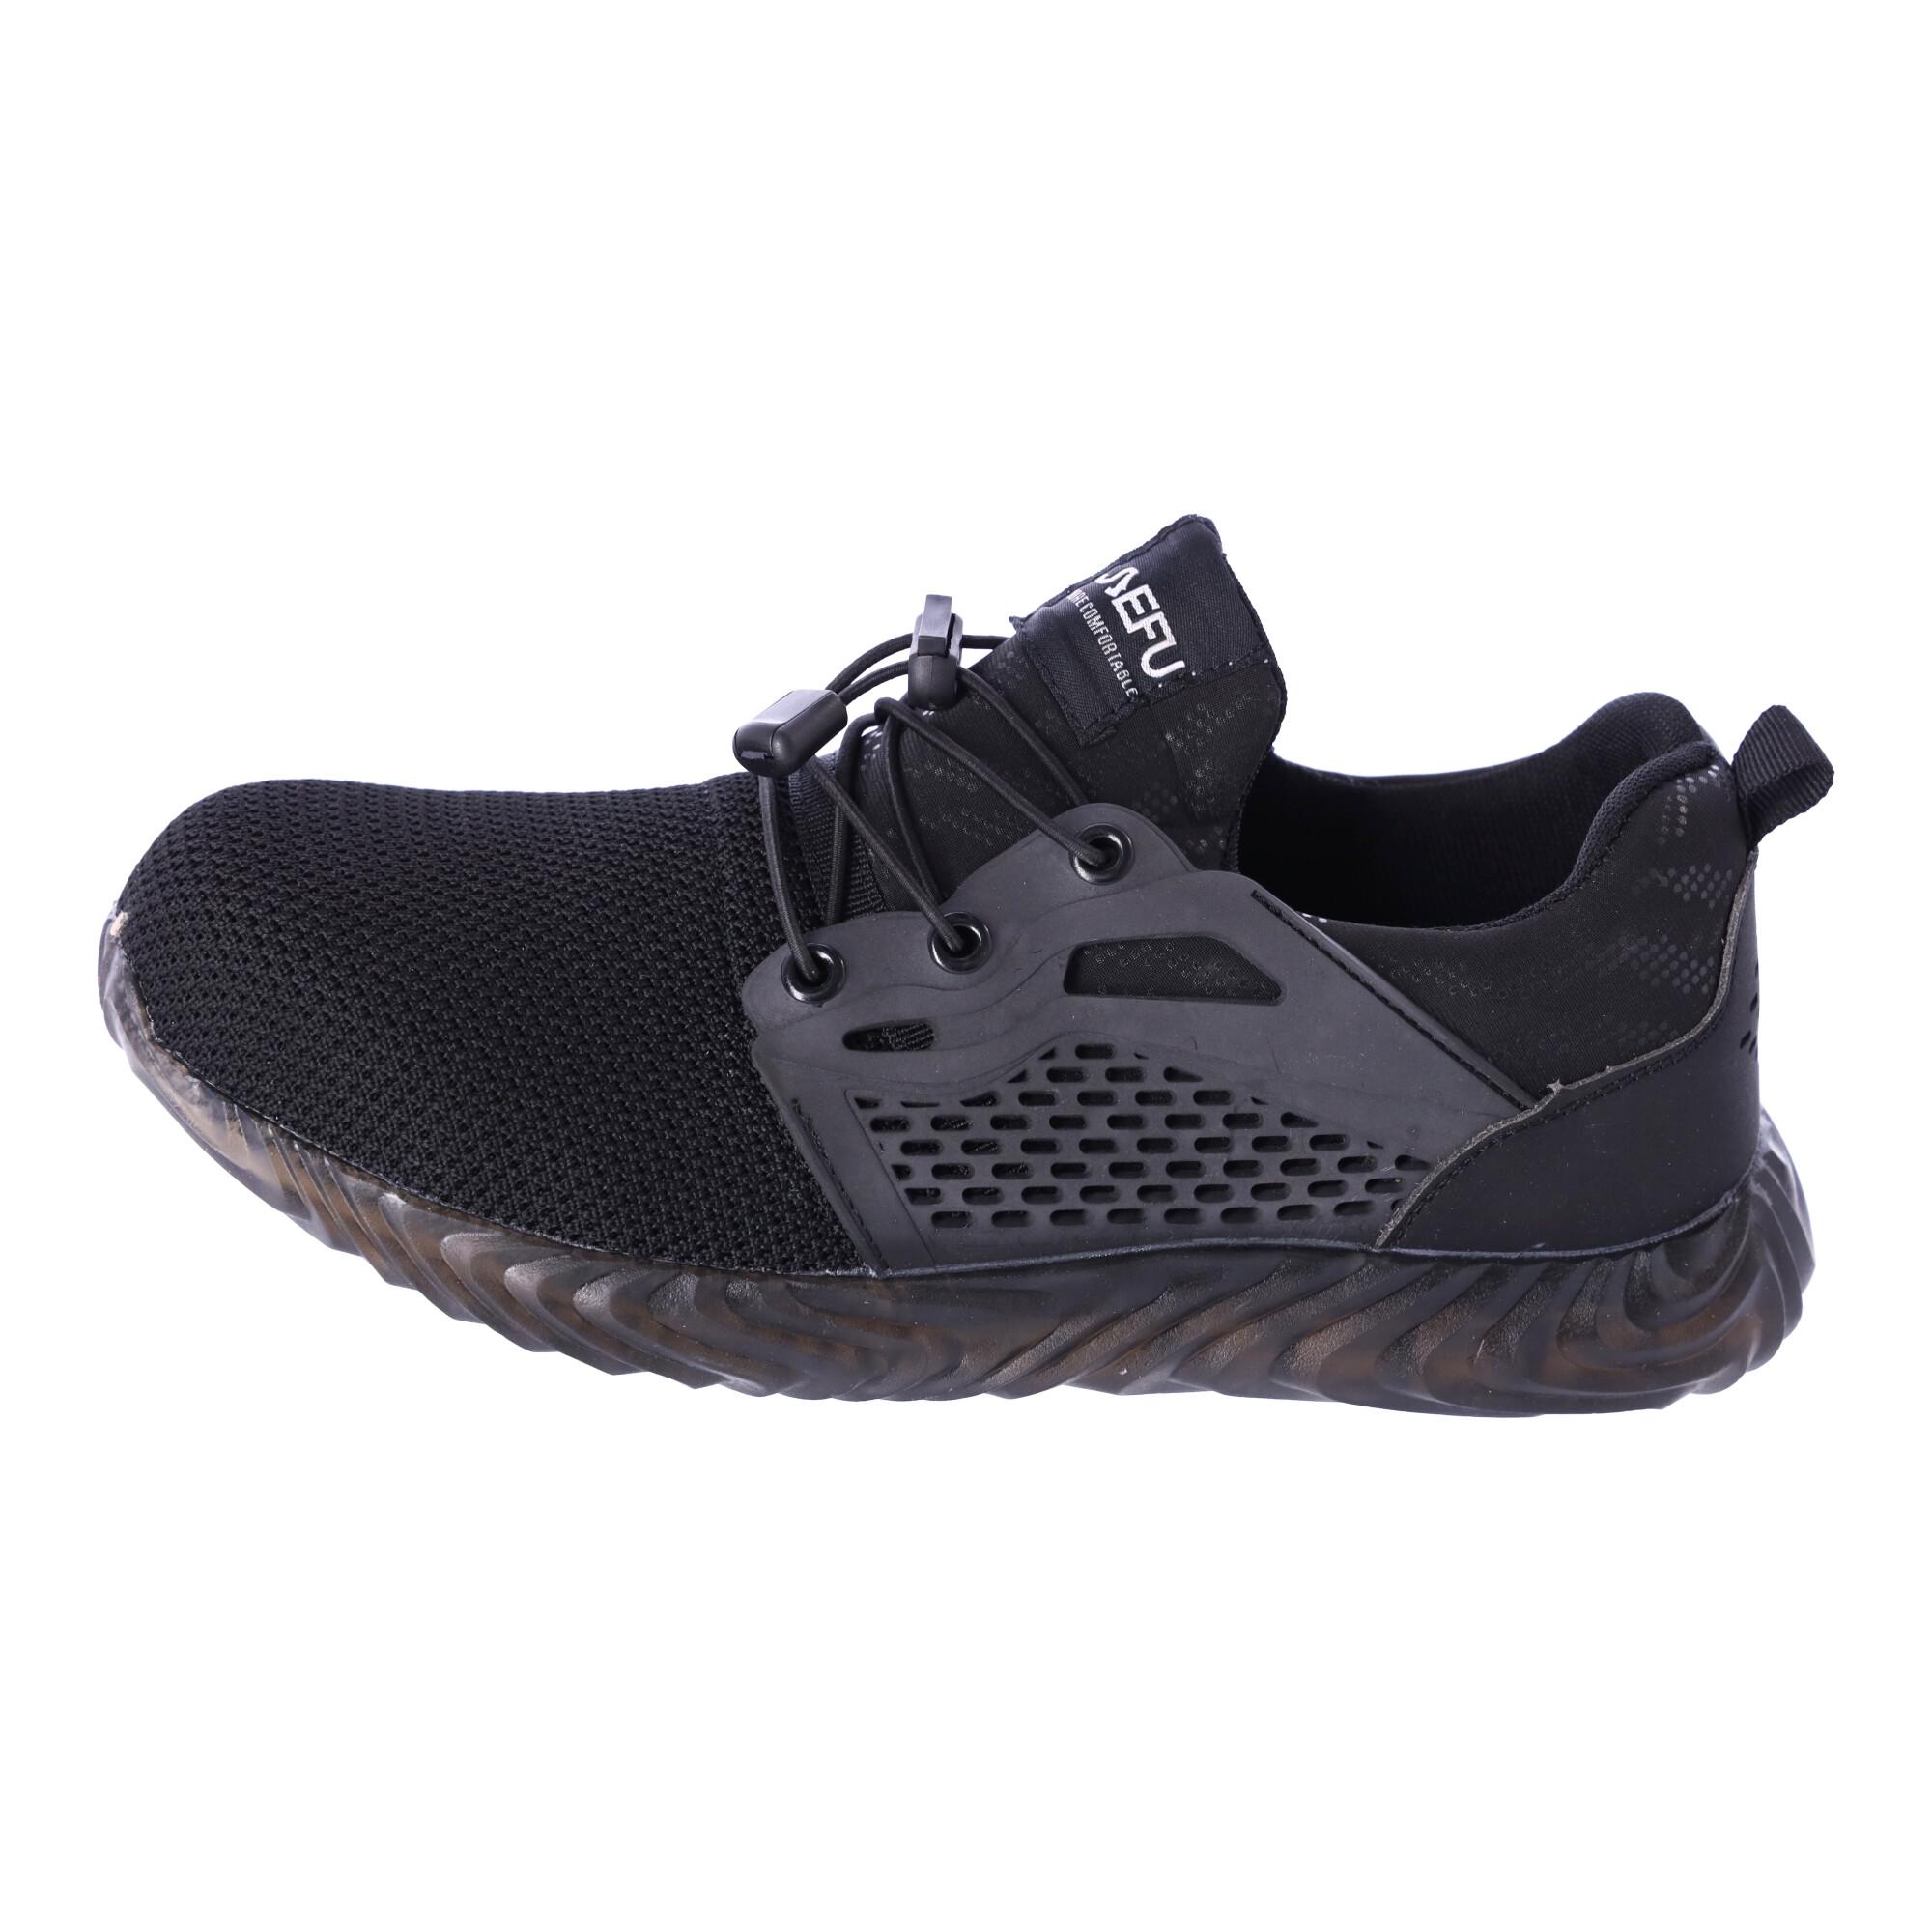 Work safety shoes "42" - black